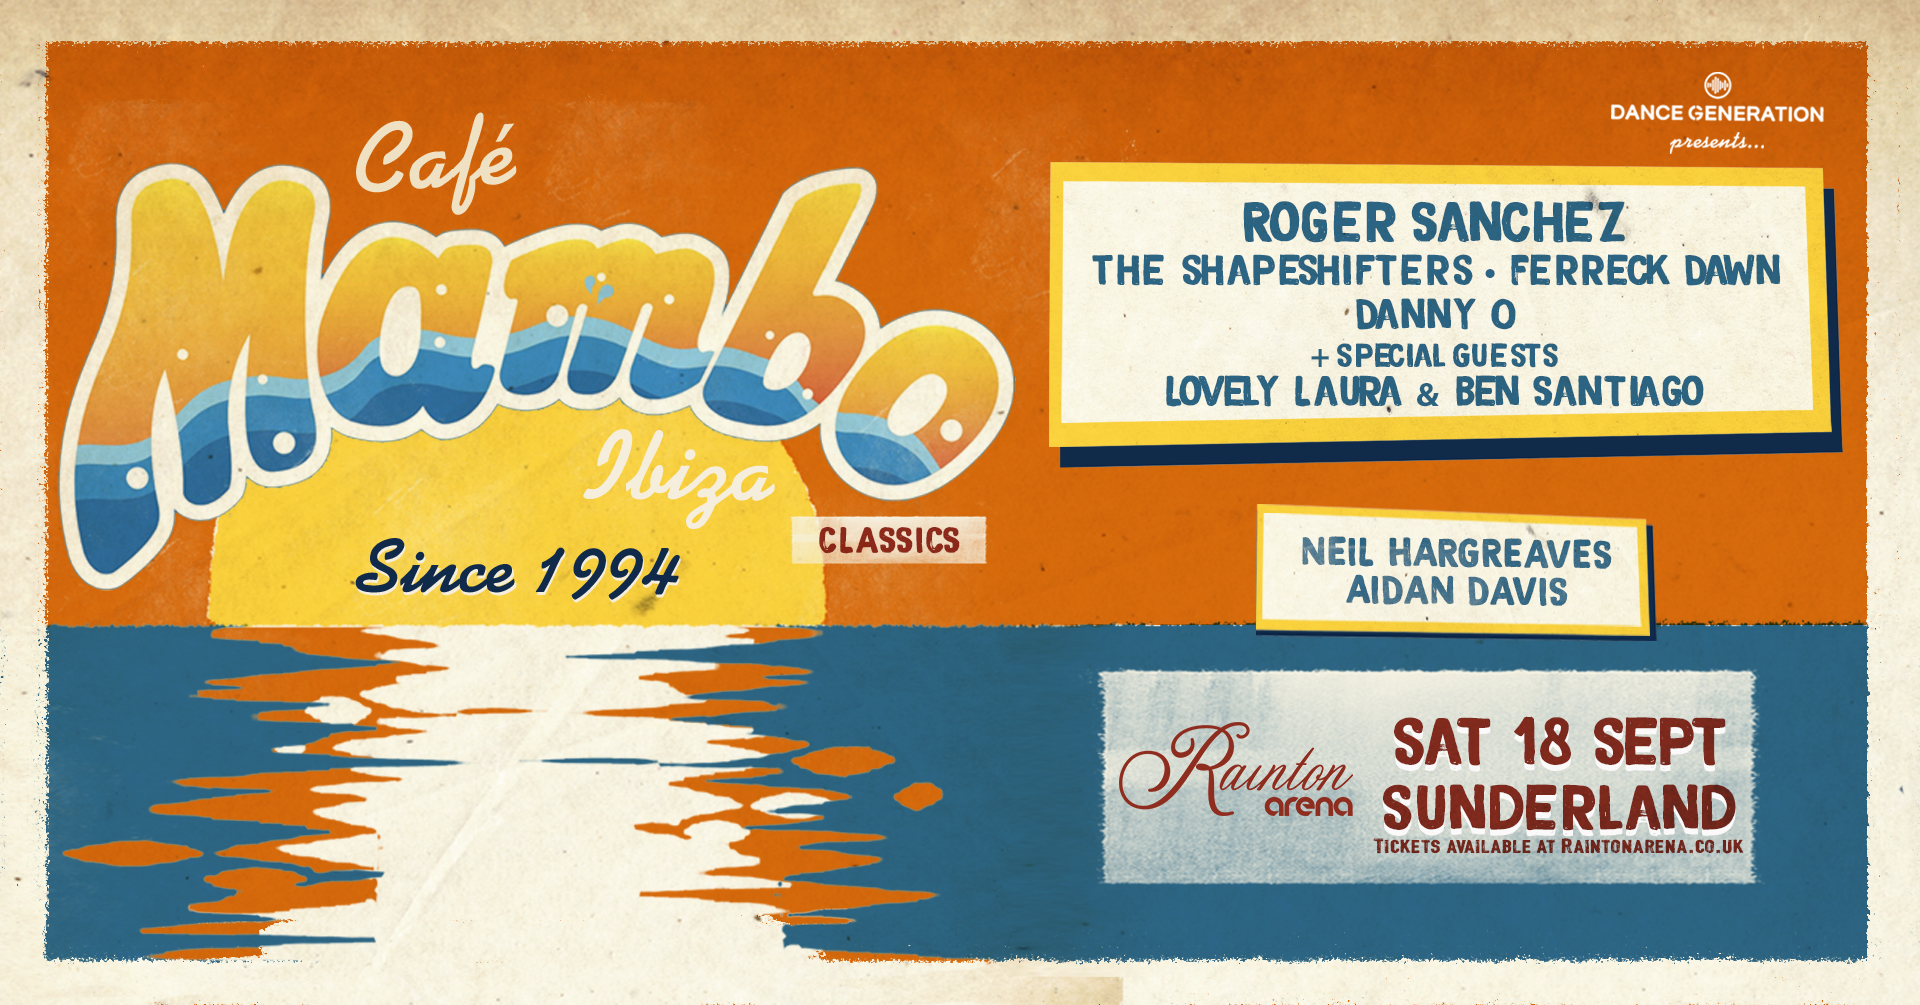 Dance Generation Presents Cafe Mambo Classics 2021, Houghton-le-Spring, Tyne and Wear,England,United Kingdom